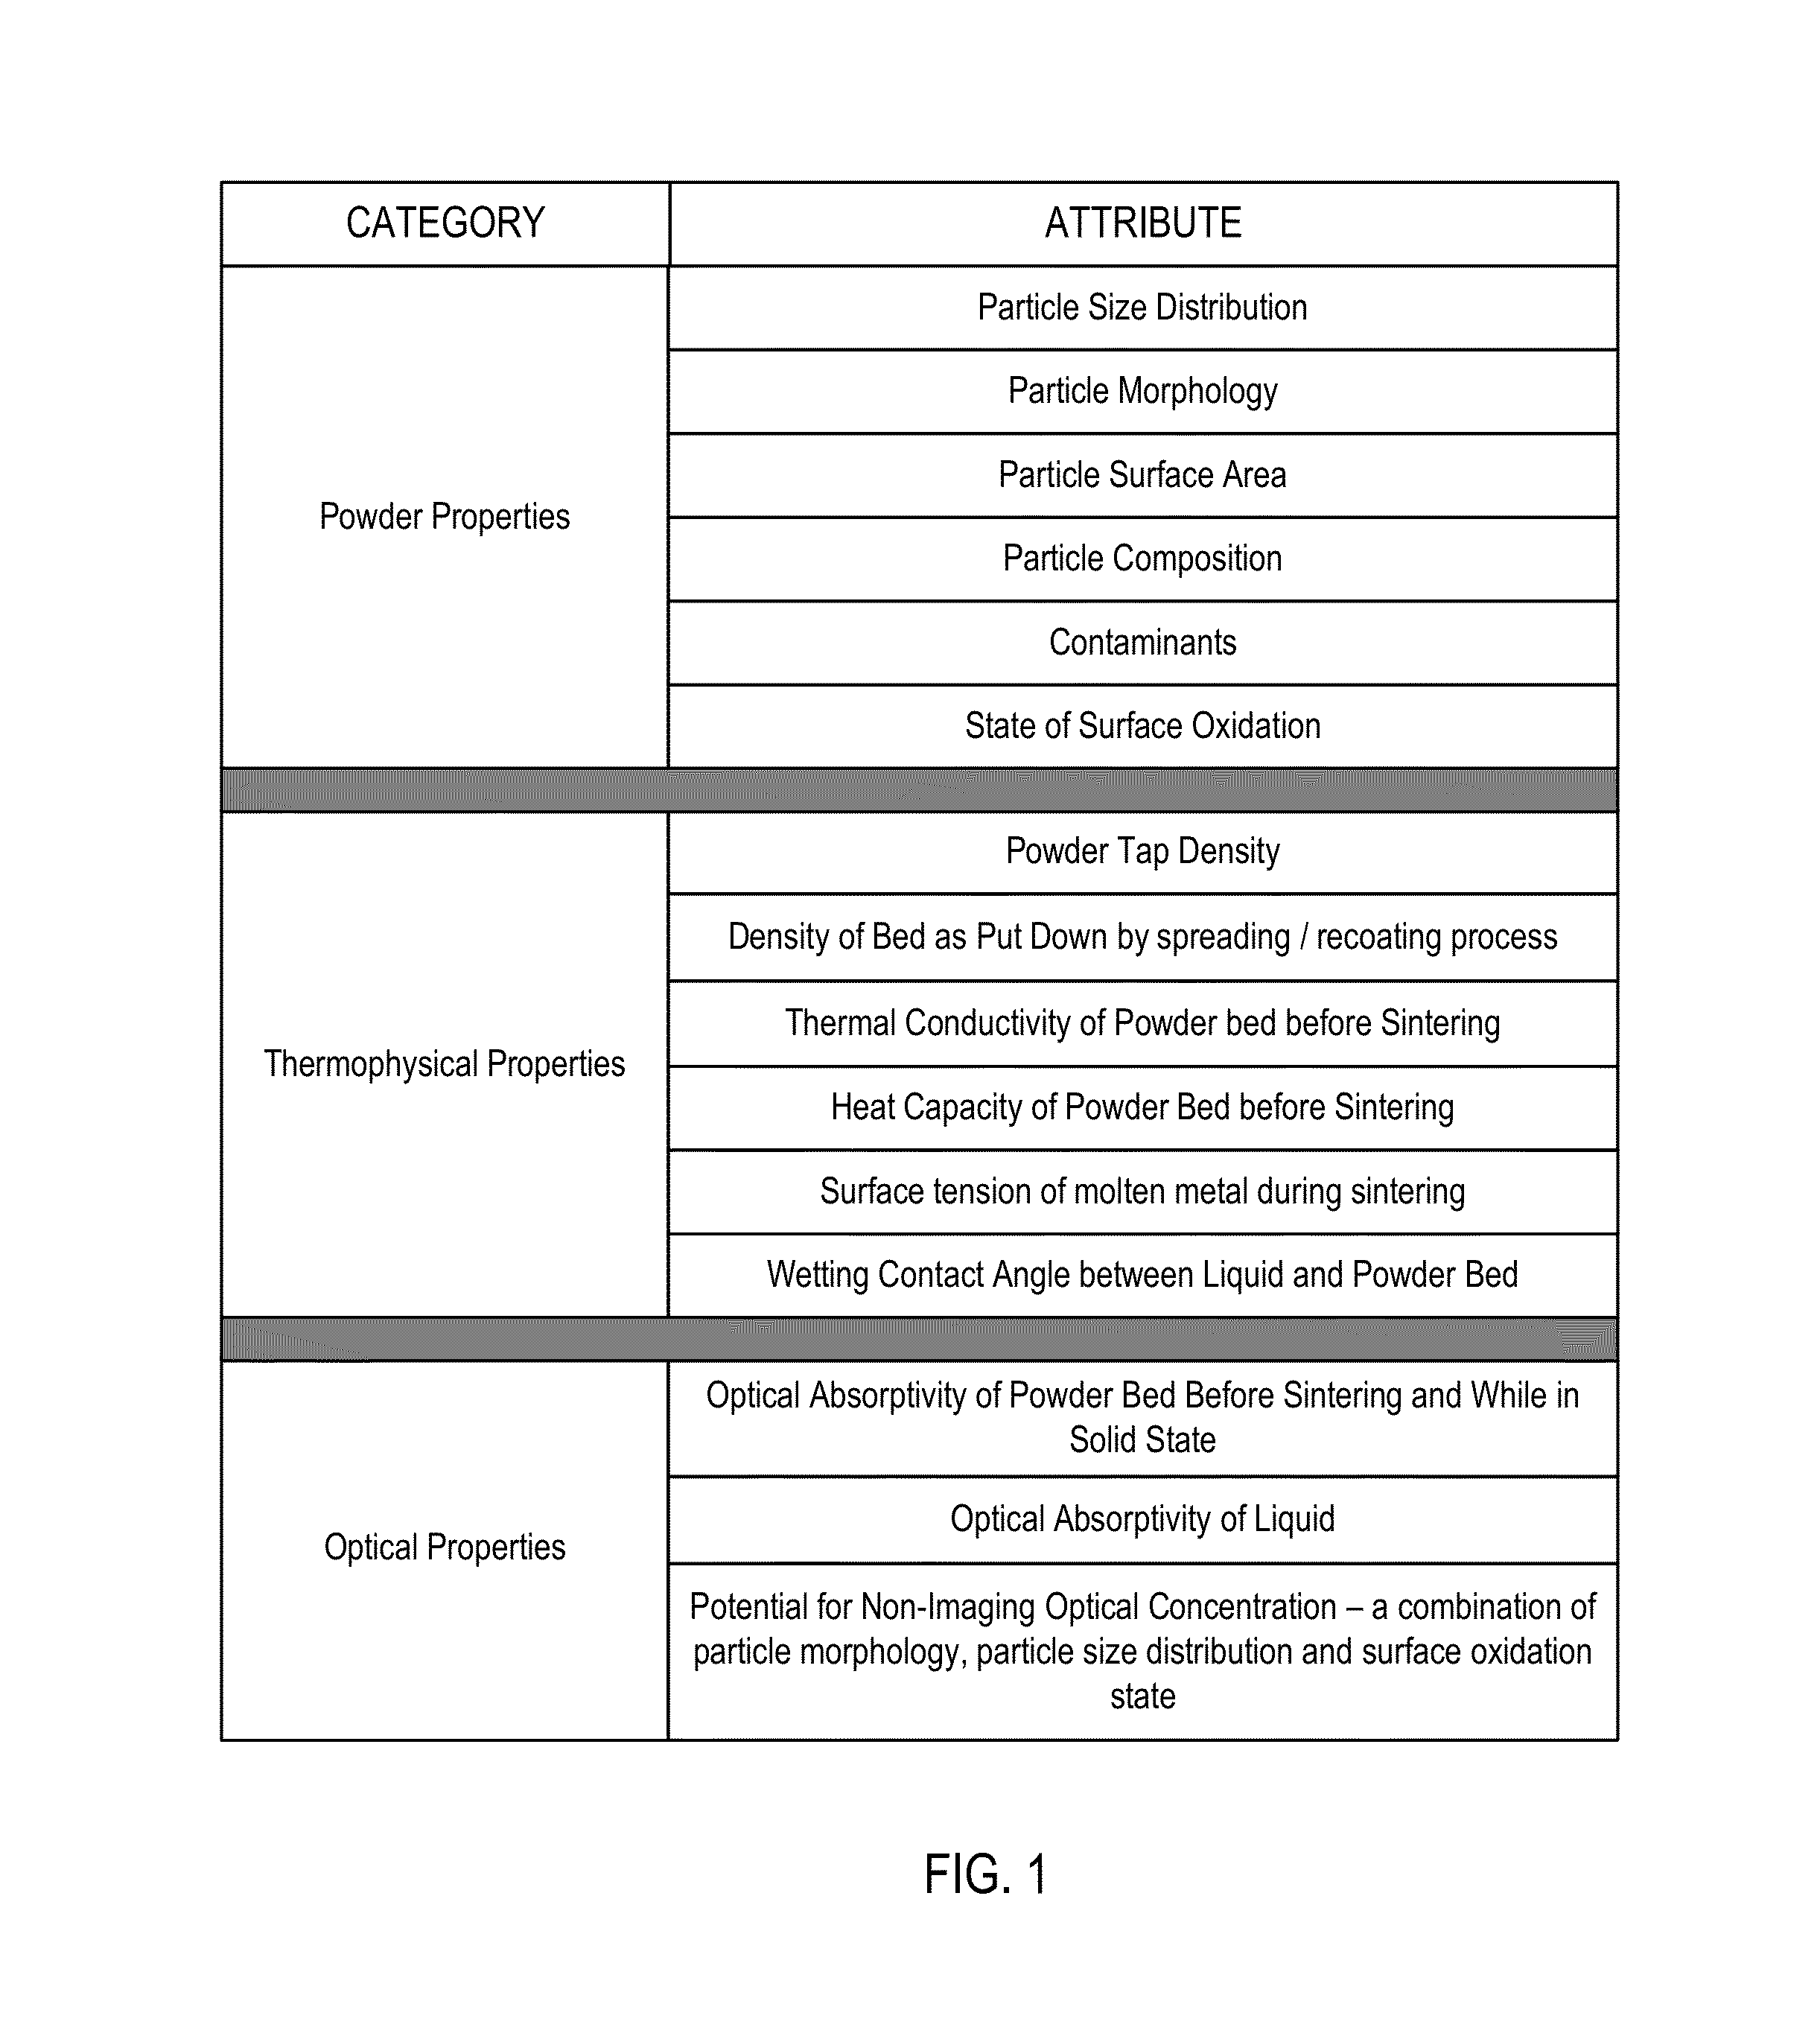 Material qualification system and methodology